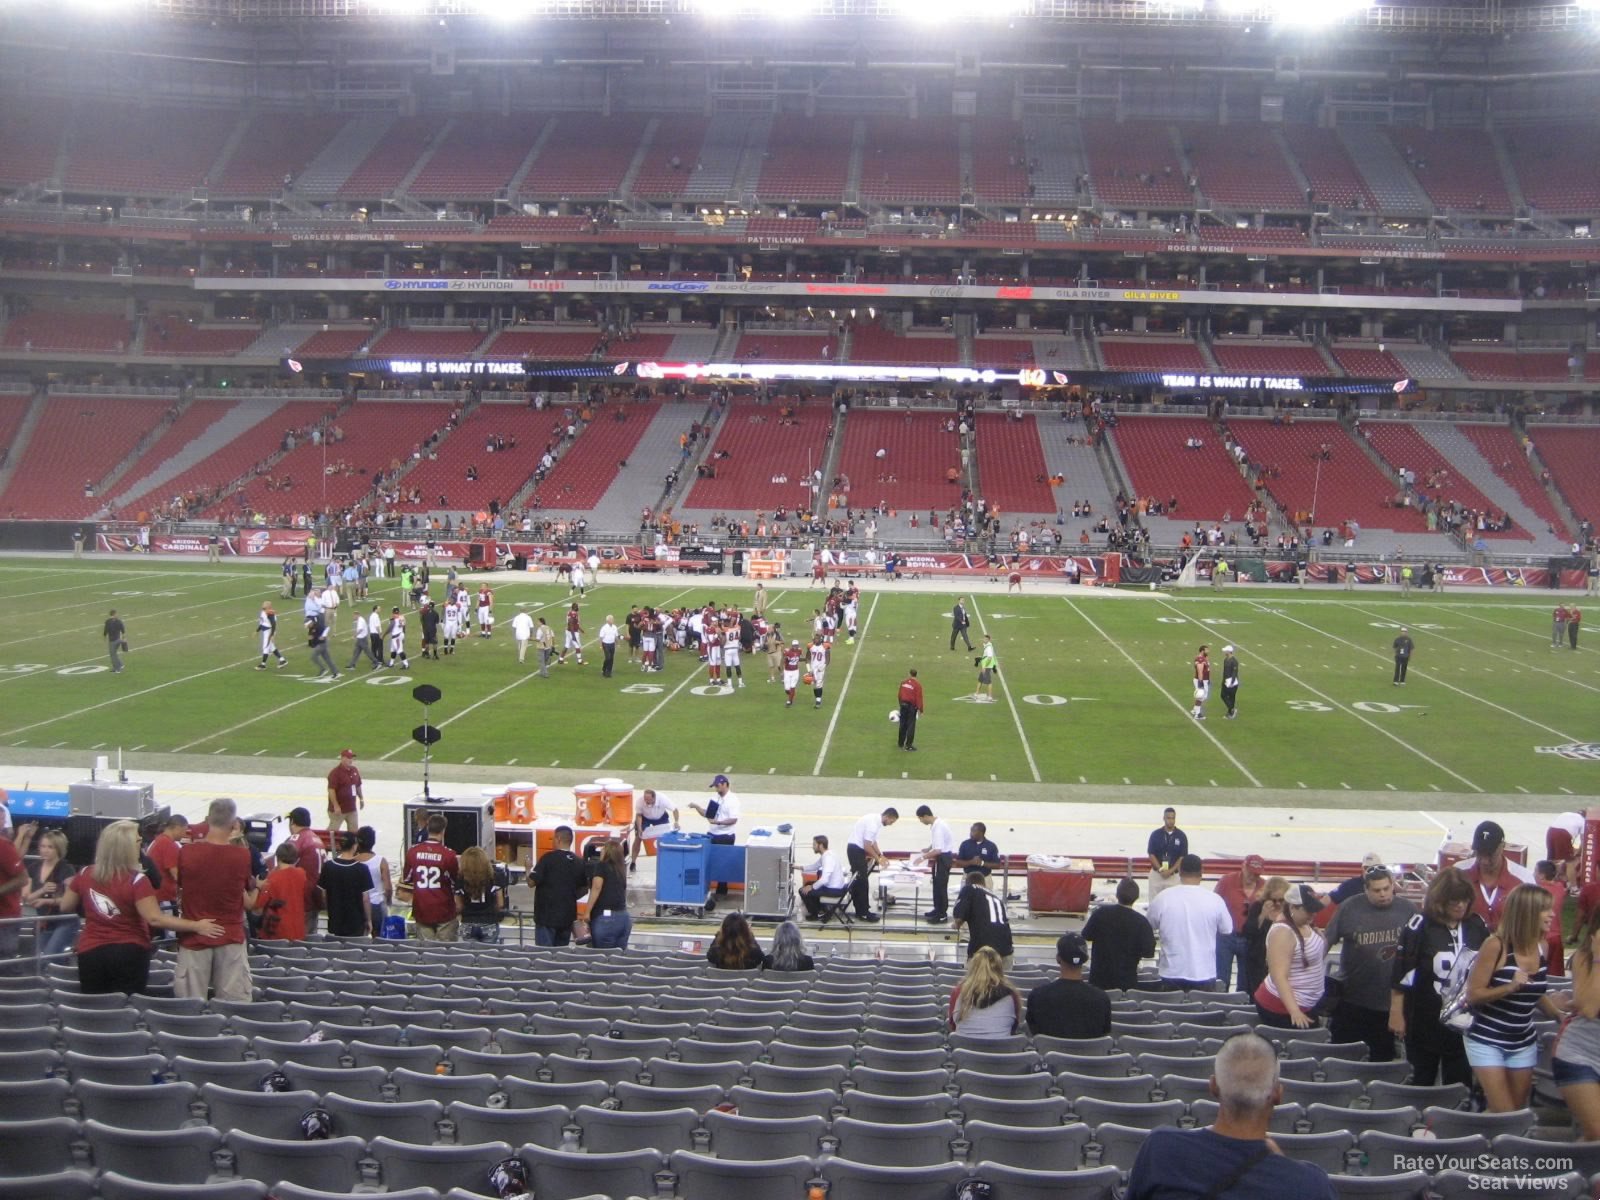 section 108, row 20 seat view  for football - state farm stadium